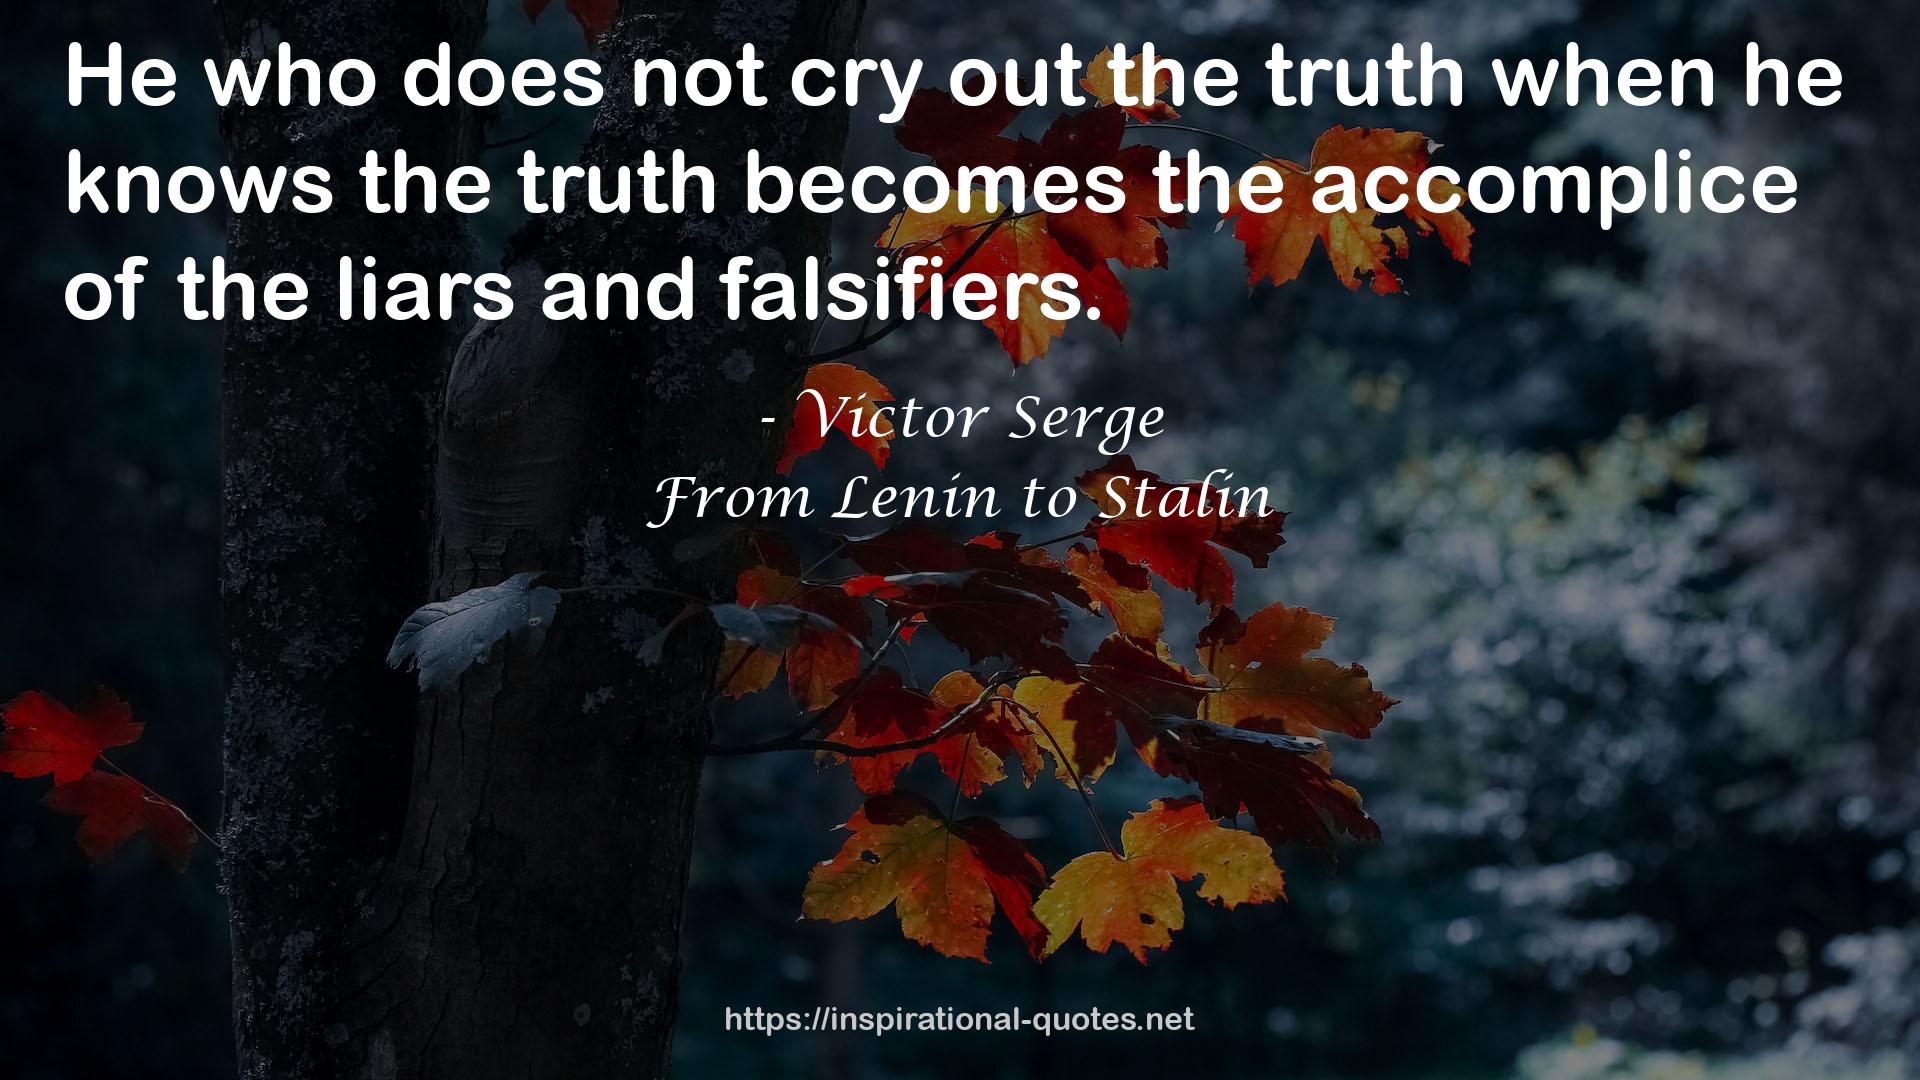 From Lenin to Stalin QUOTES